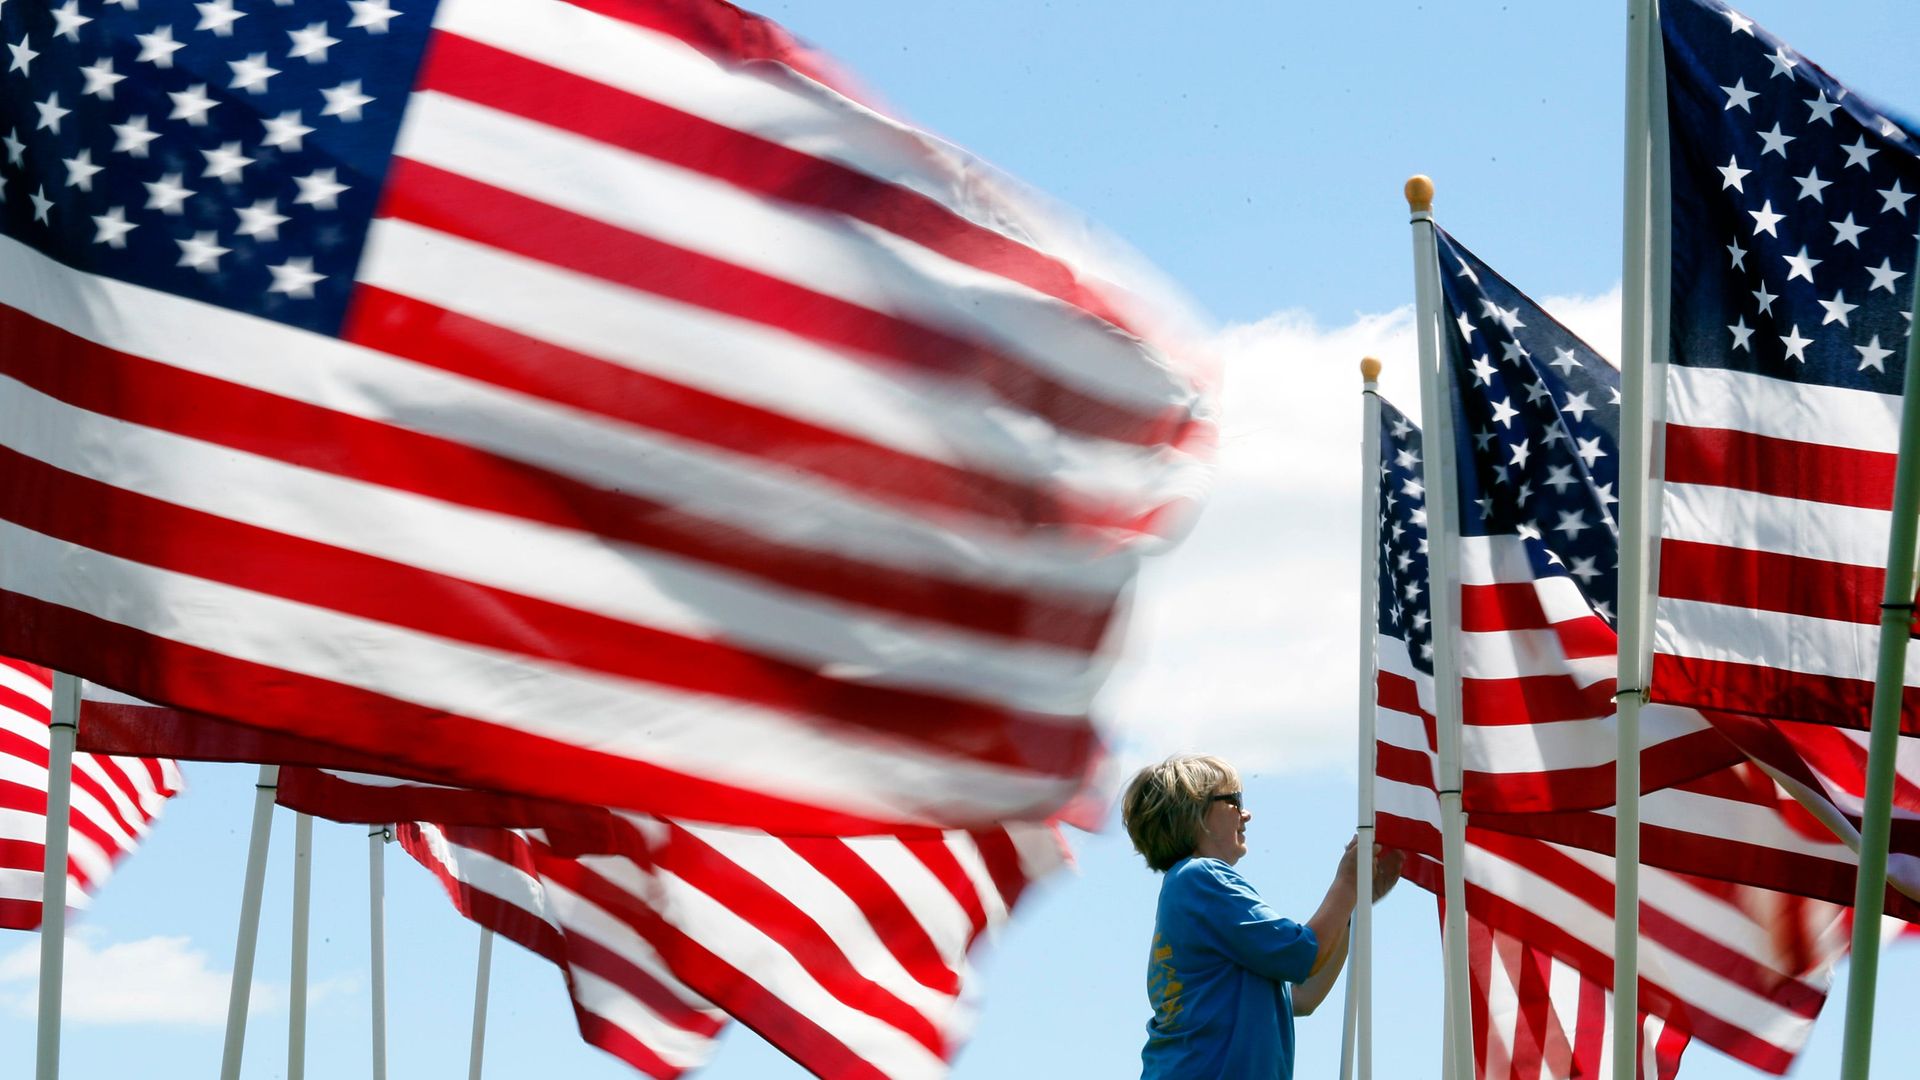 A woman adjusts a flag in a display of several